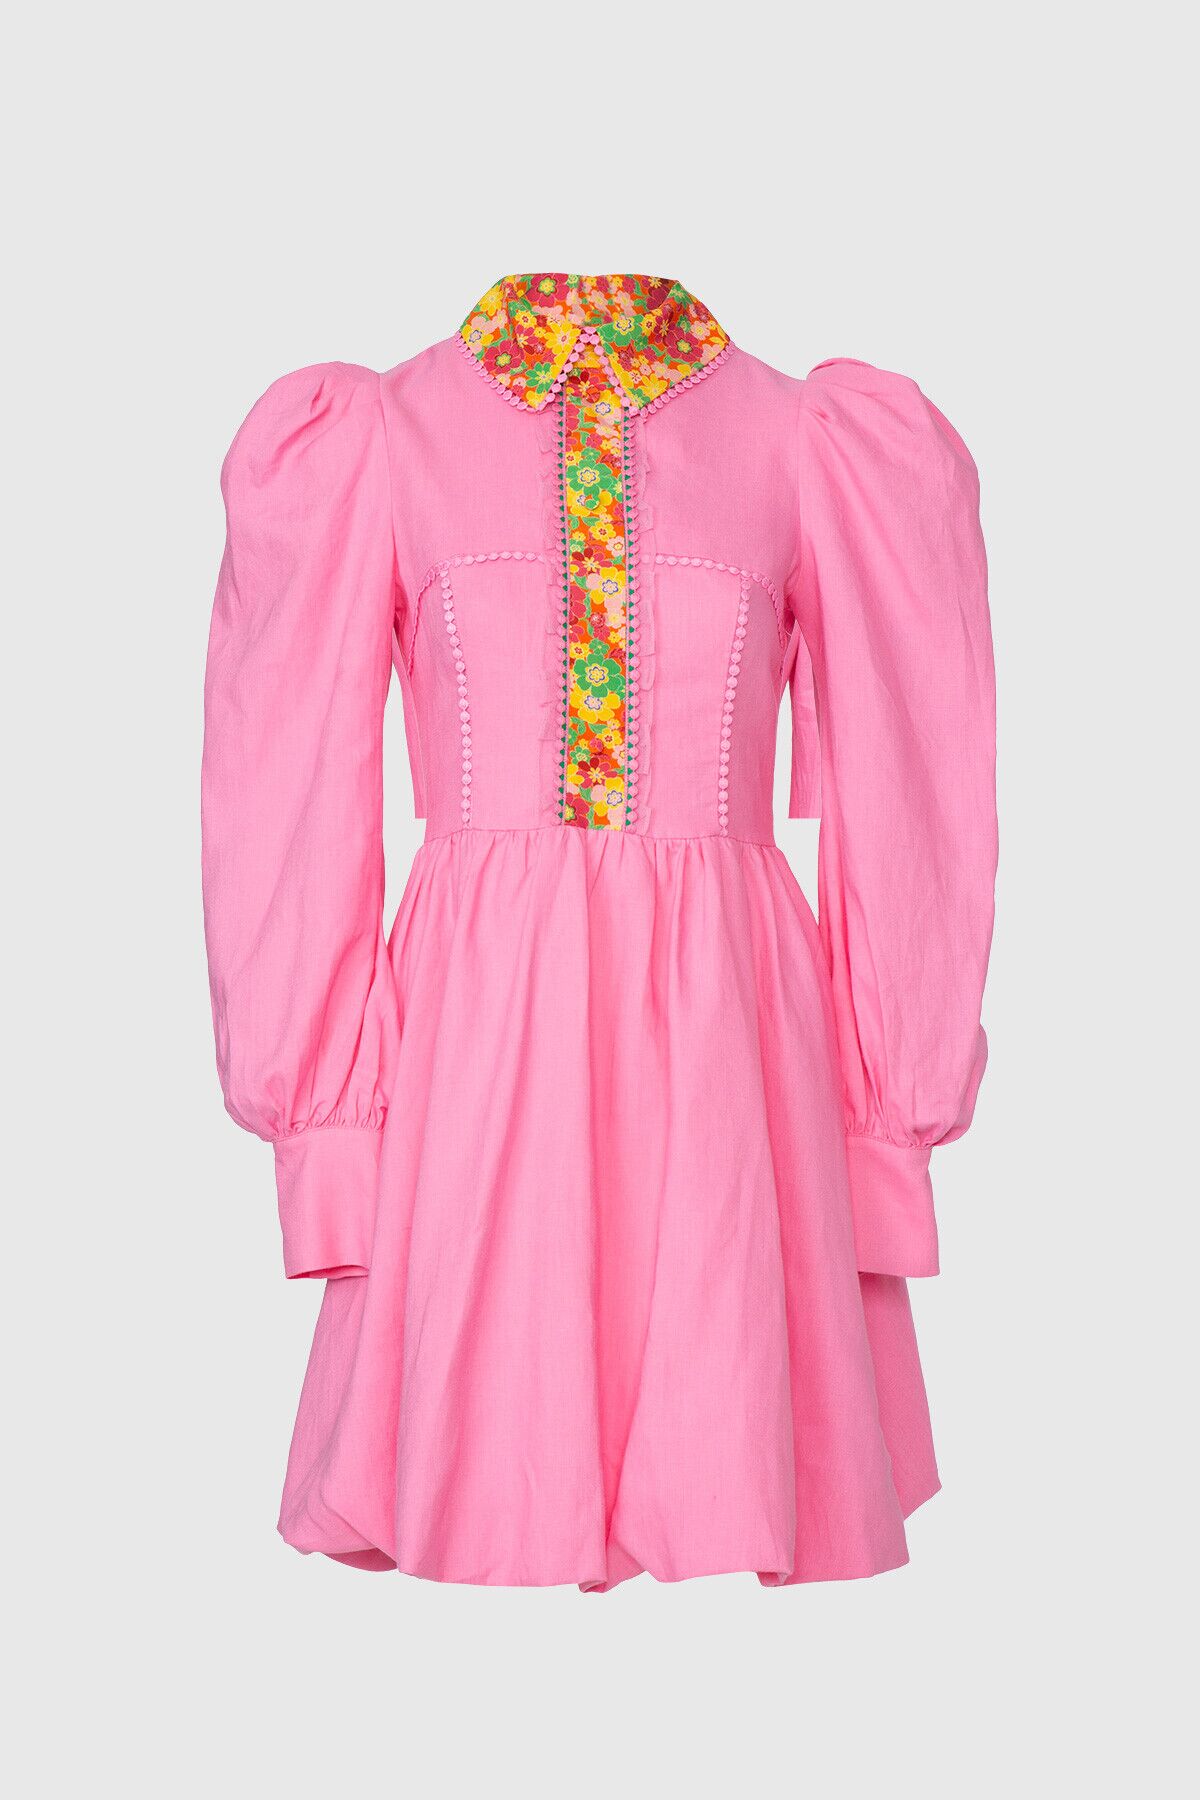 GIZIA - Pink Dress With Pattern Embroidered Collar